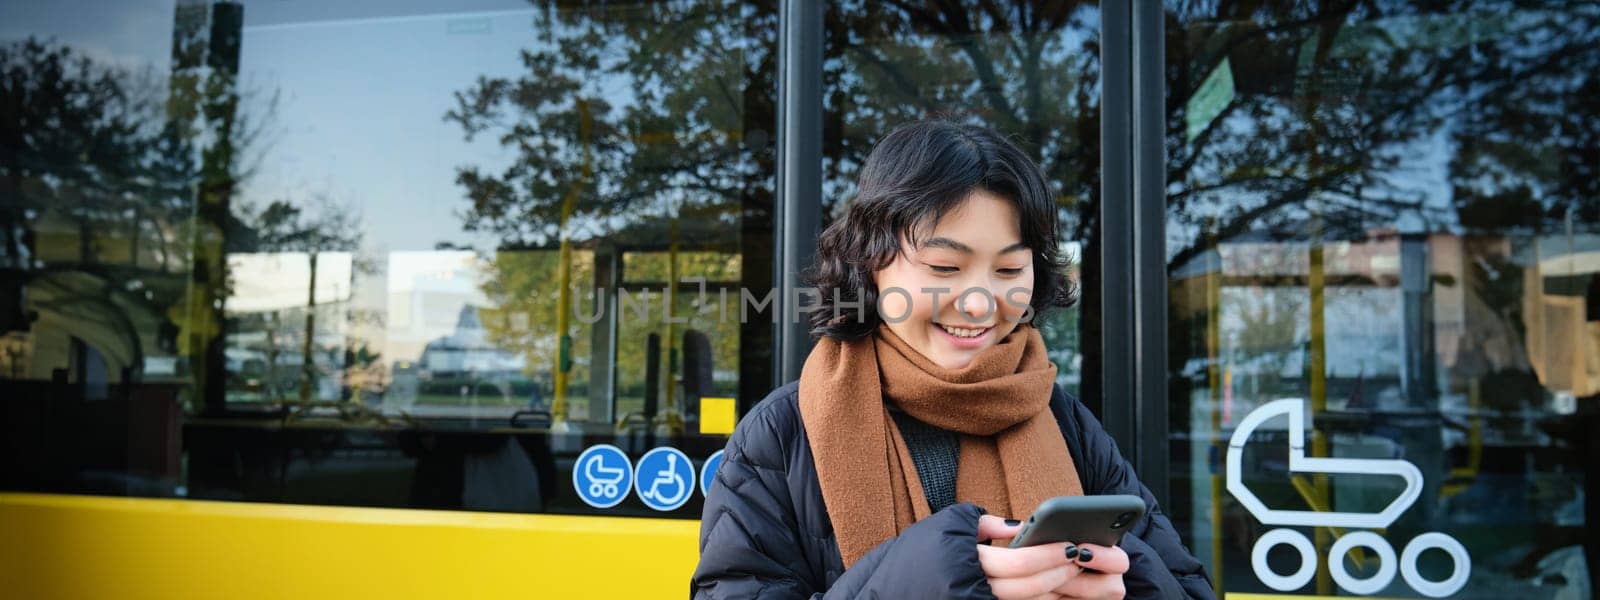 Young beautiful woman standing on bus stop, texting message on smartphone, holding mobile phone, checking her schedule, buying ticket online, wearing winter clothes.